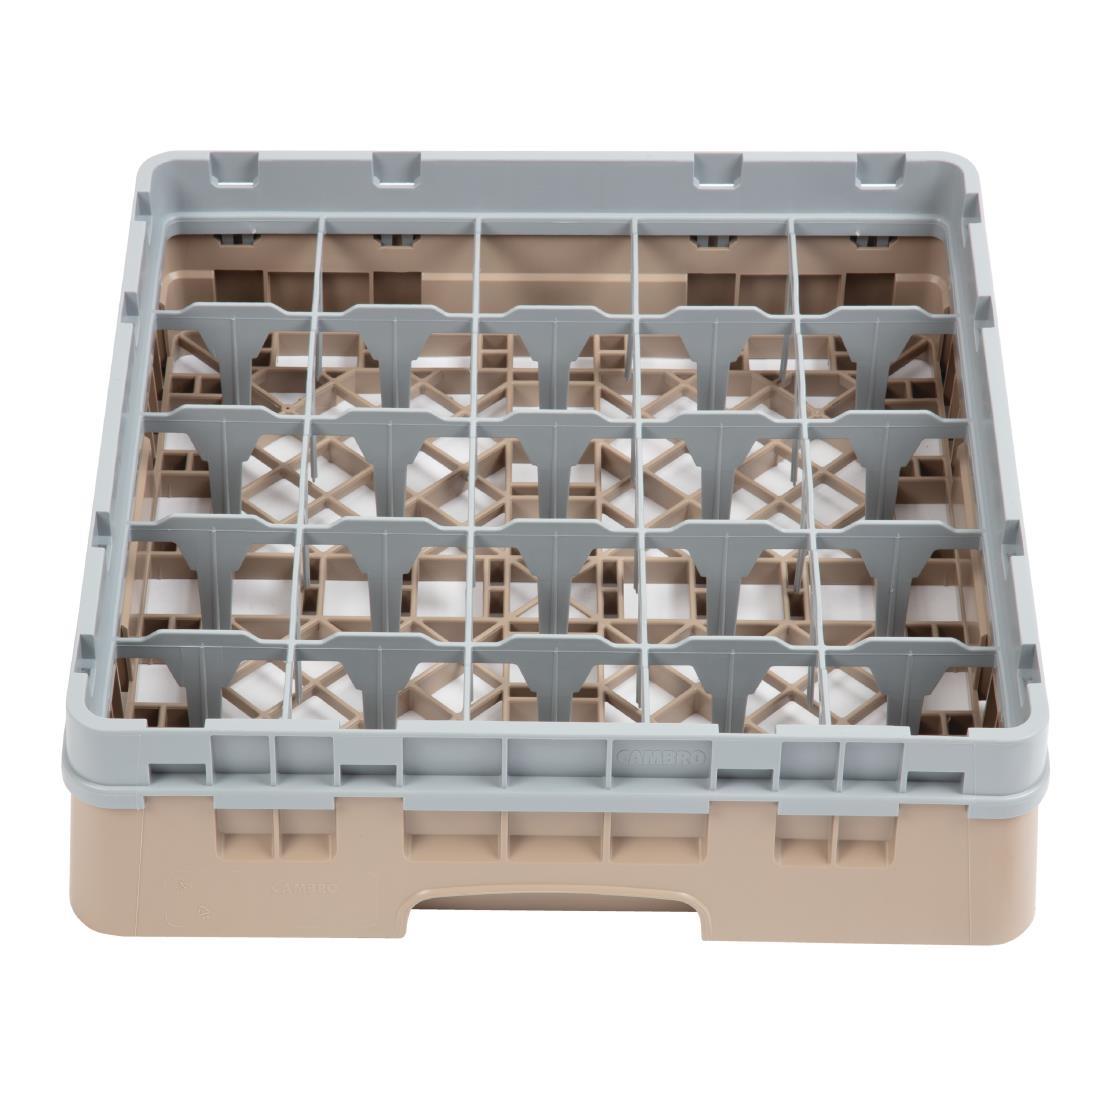 Cambro Camrack Beige 25 Compartments Max Glass Height 92mm - DW554  - 2